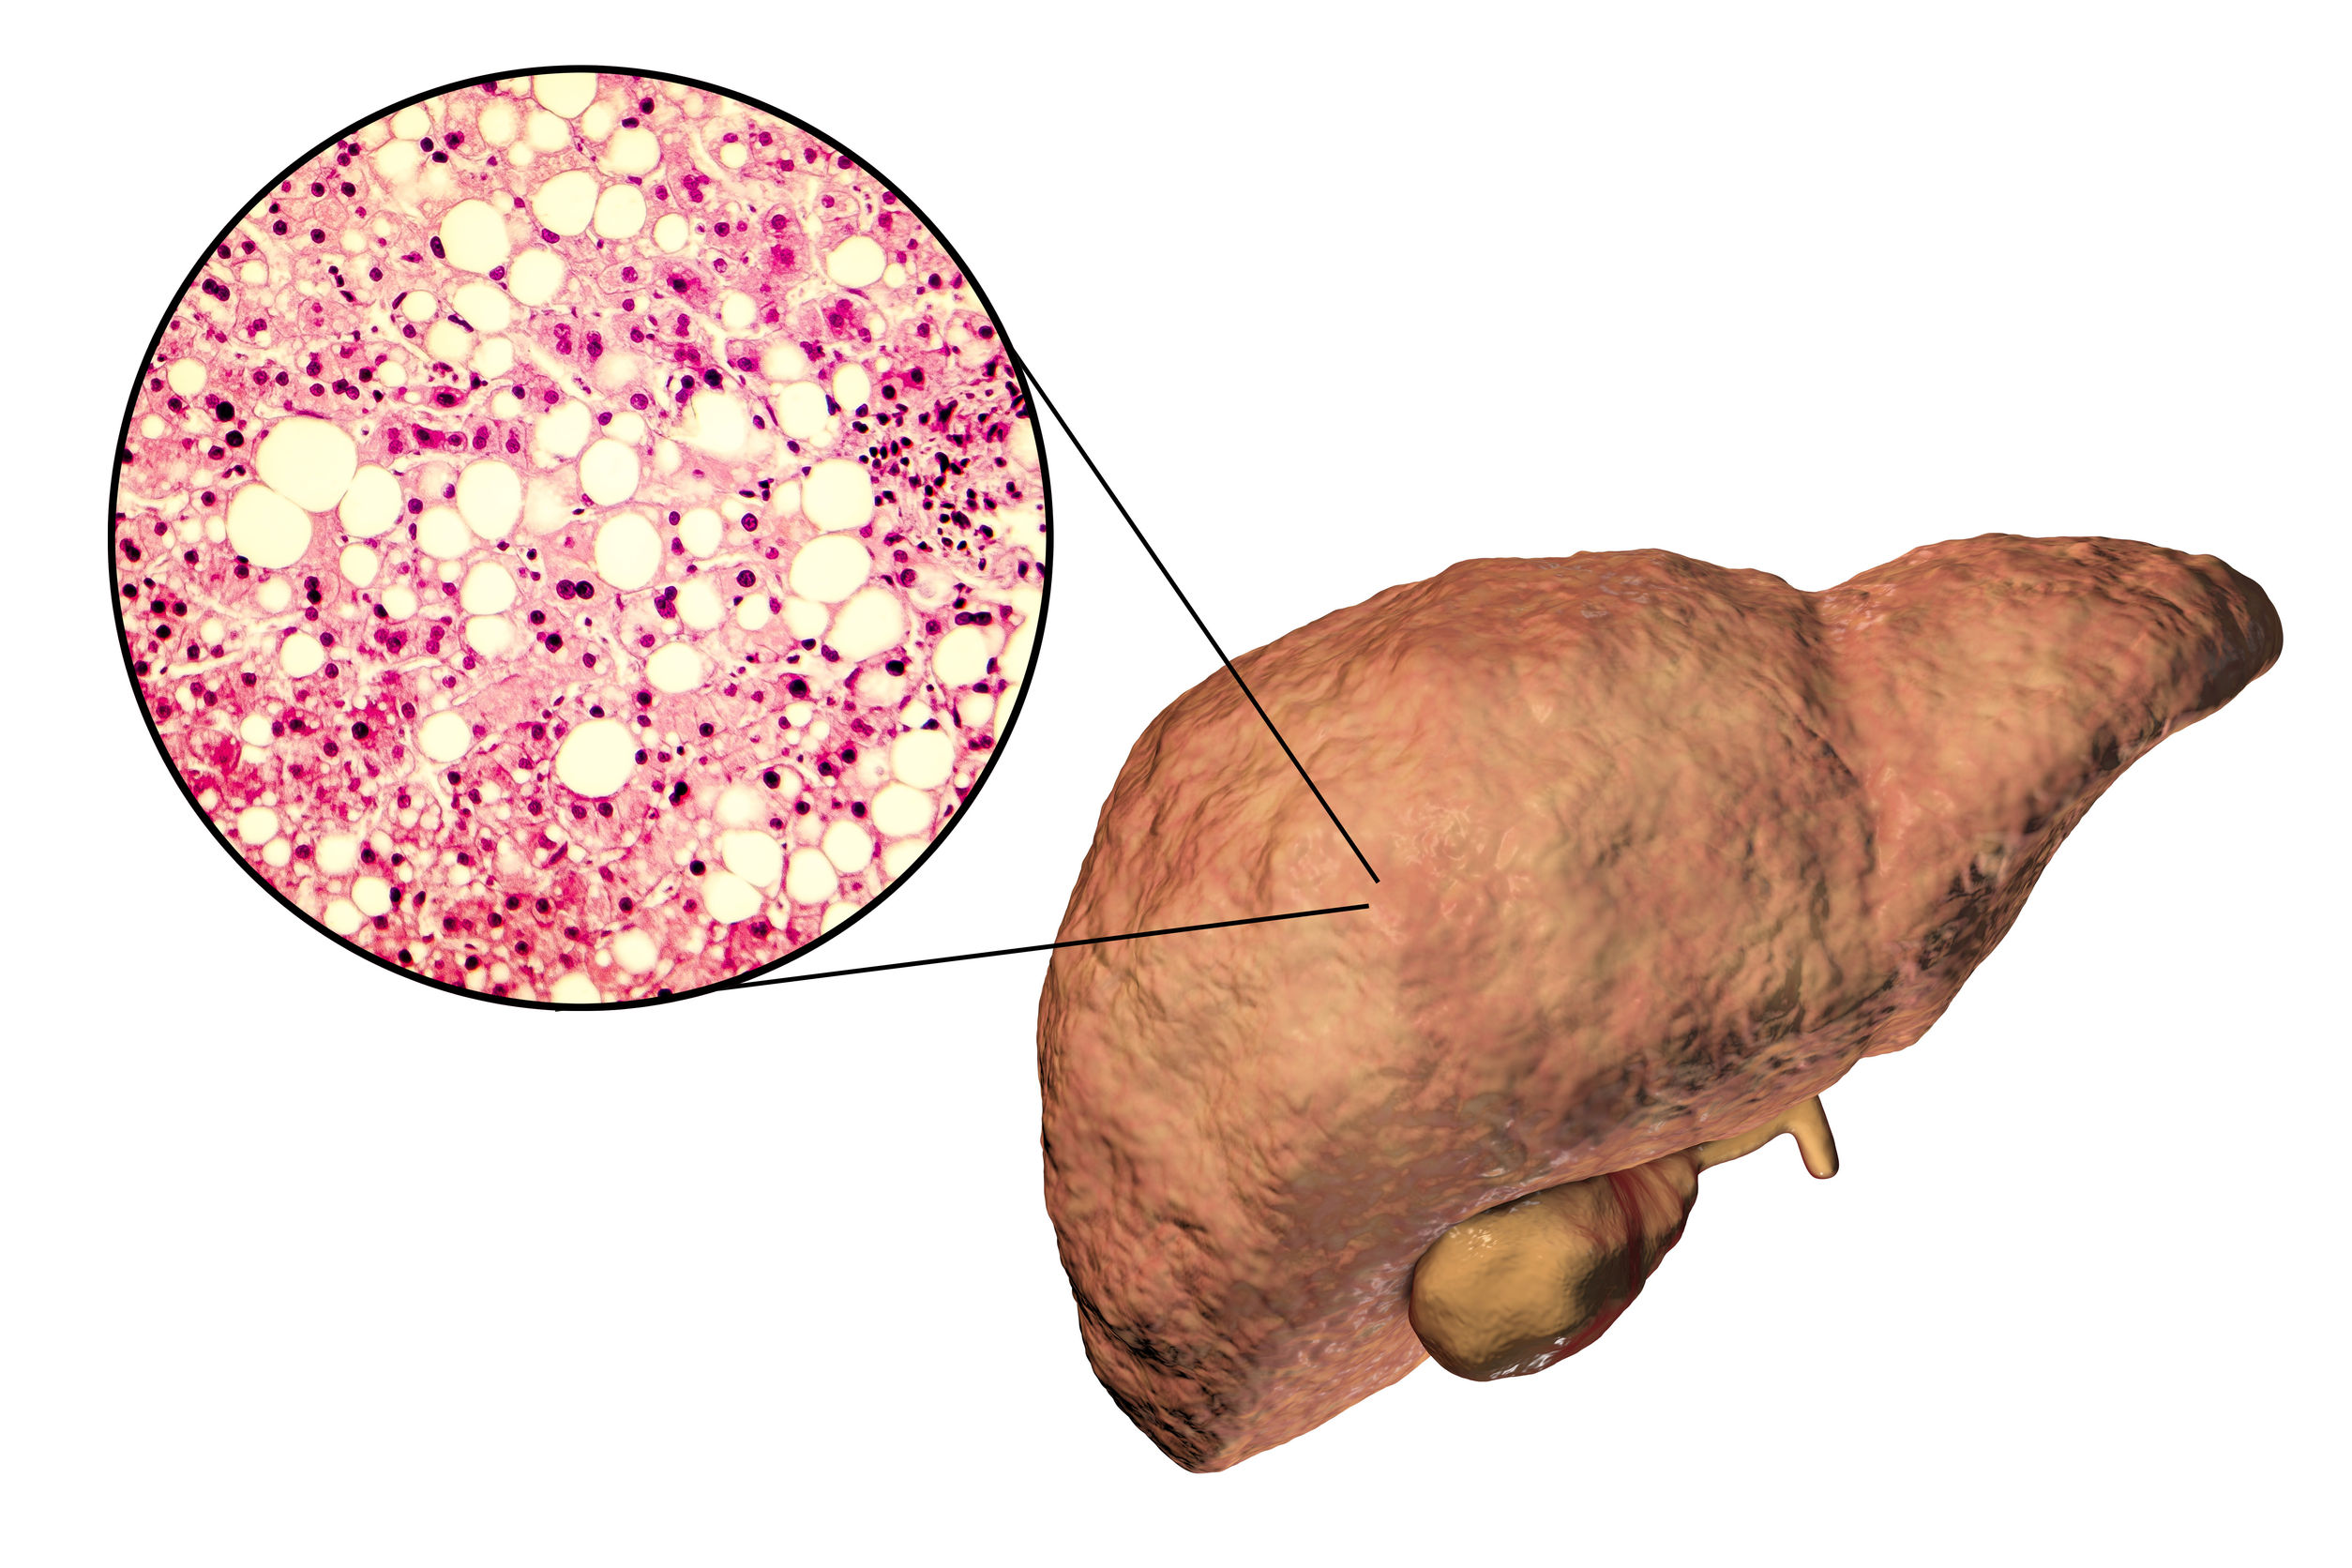 Targeting non-alcoholic fatty liver disease